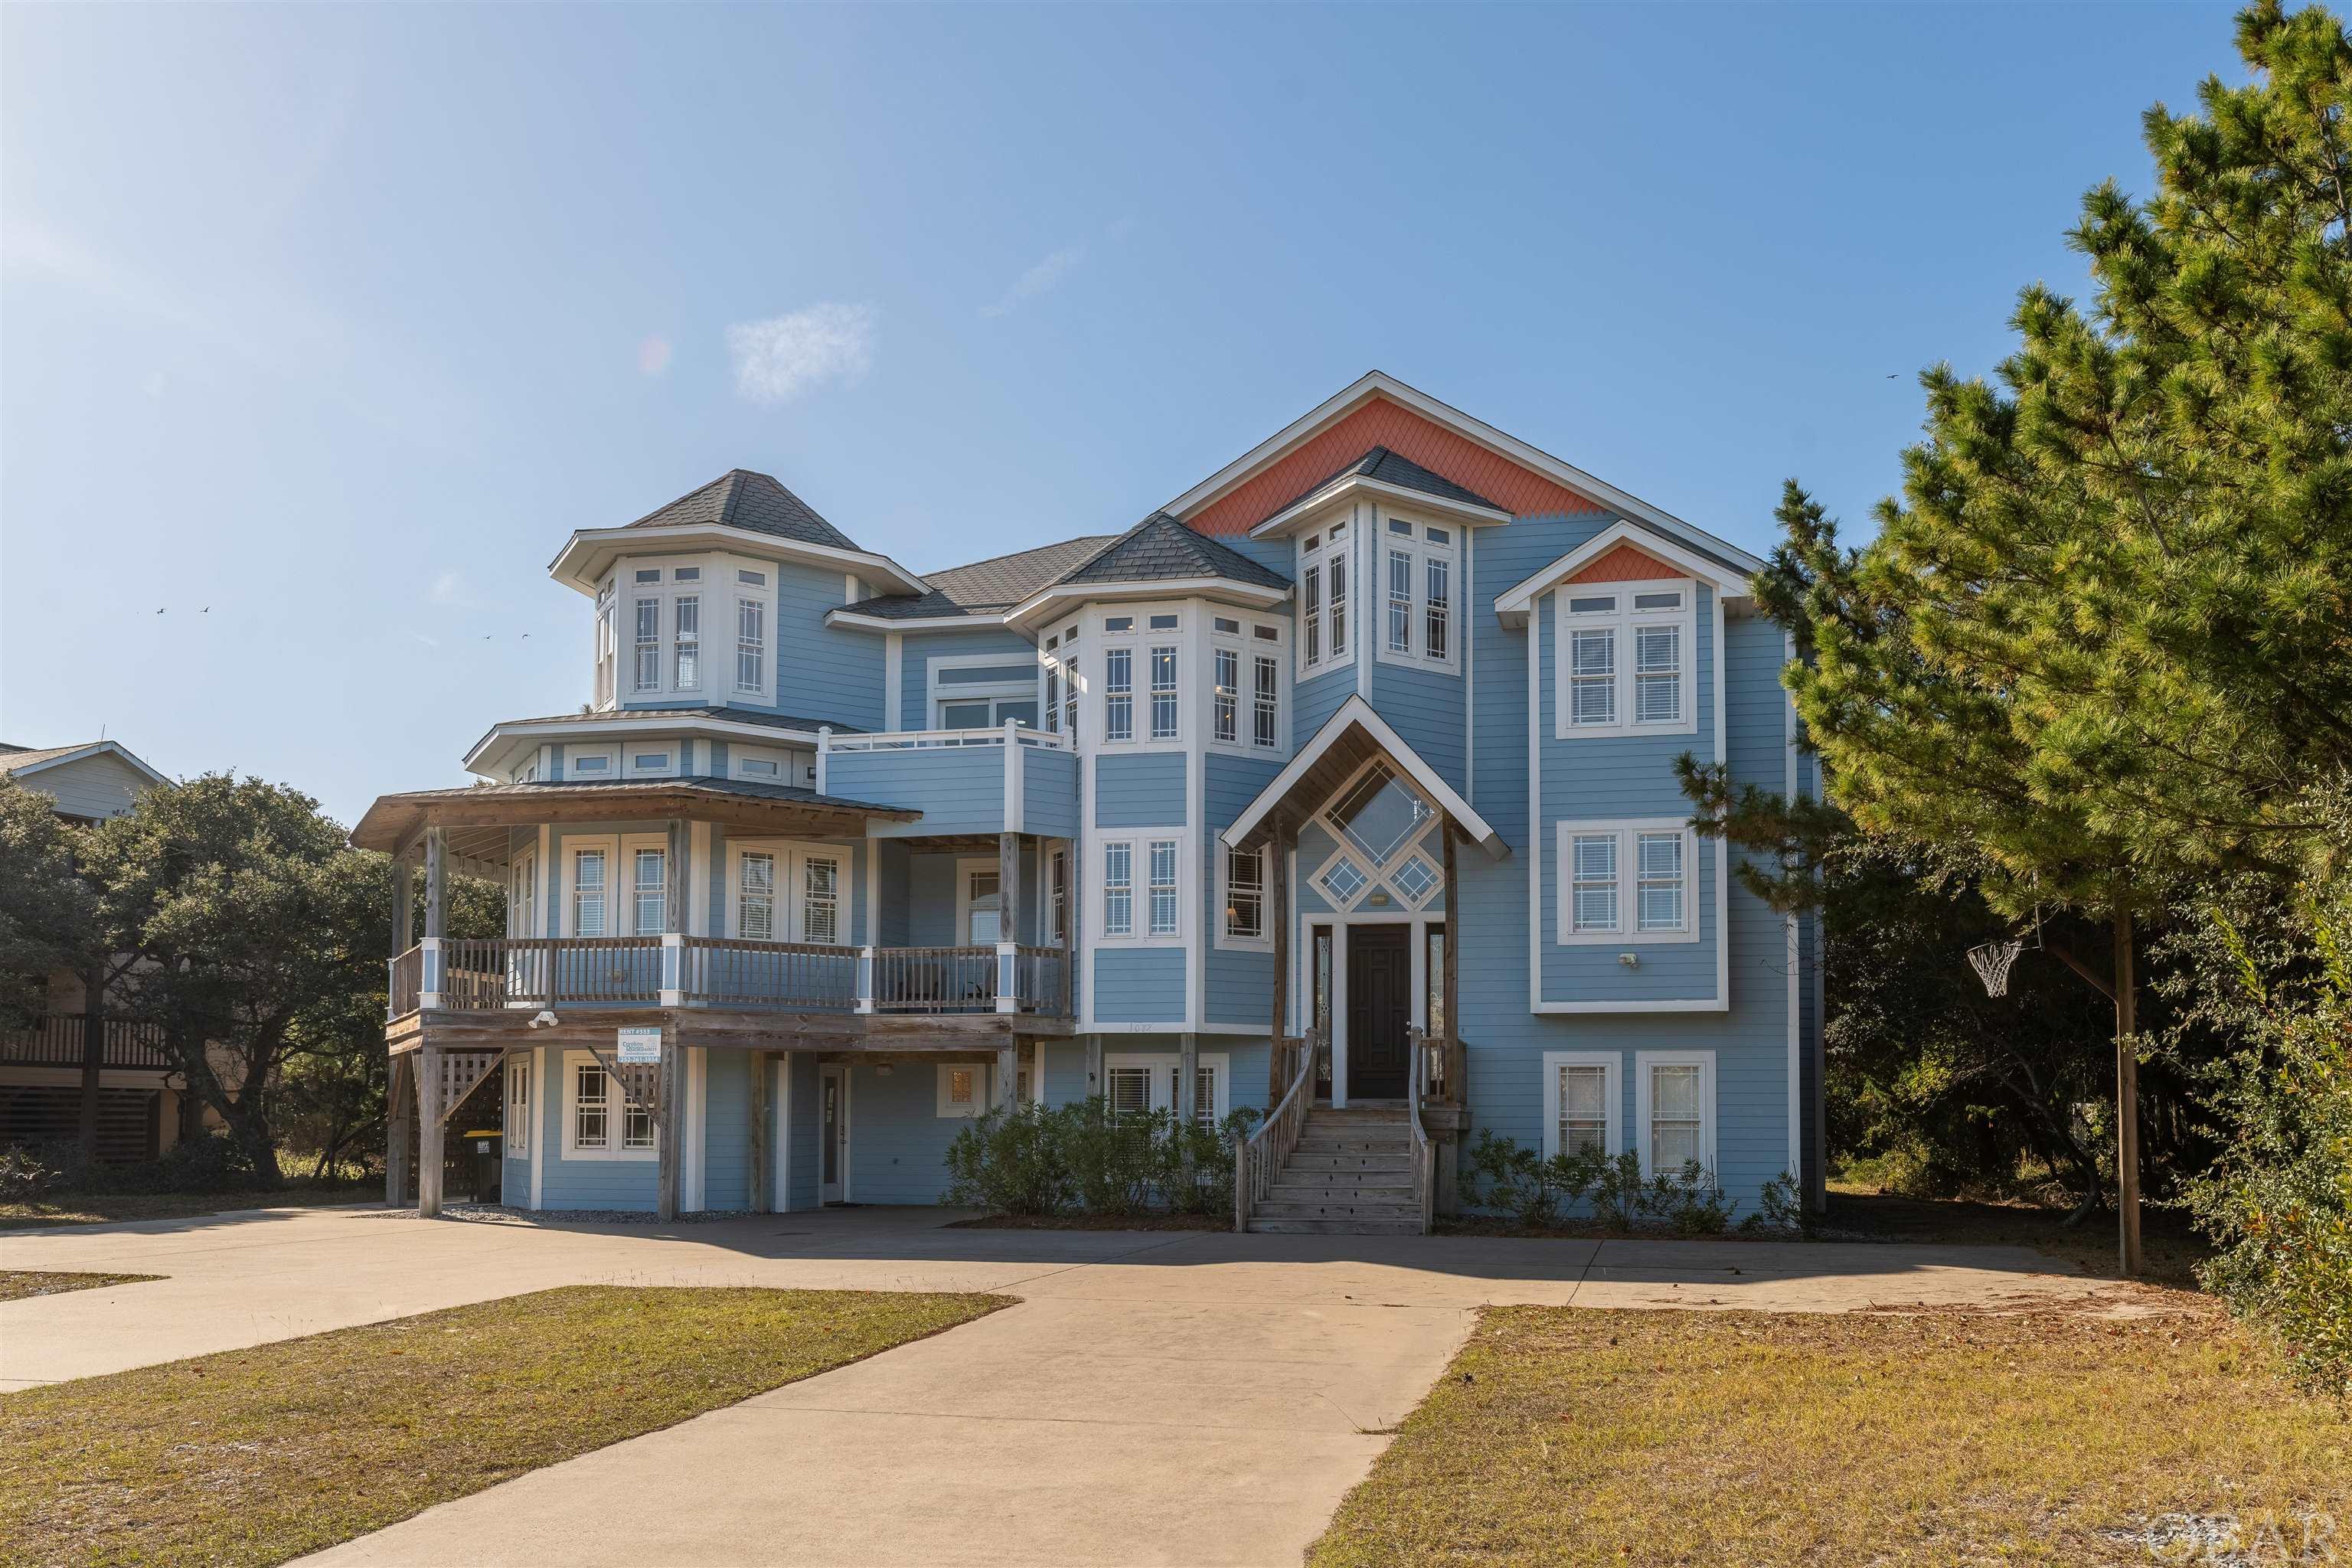 1082 Whalehead Drive, Corolla, NC 27927, 10 Bedrooms Bedrooms, ,10 BathroomsBathrooms,Residential,For sale,Whalehead Drive,124037